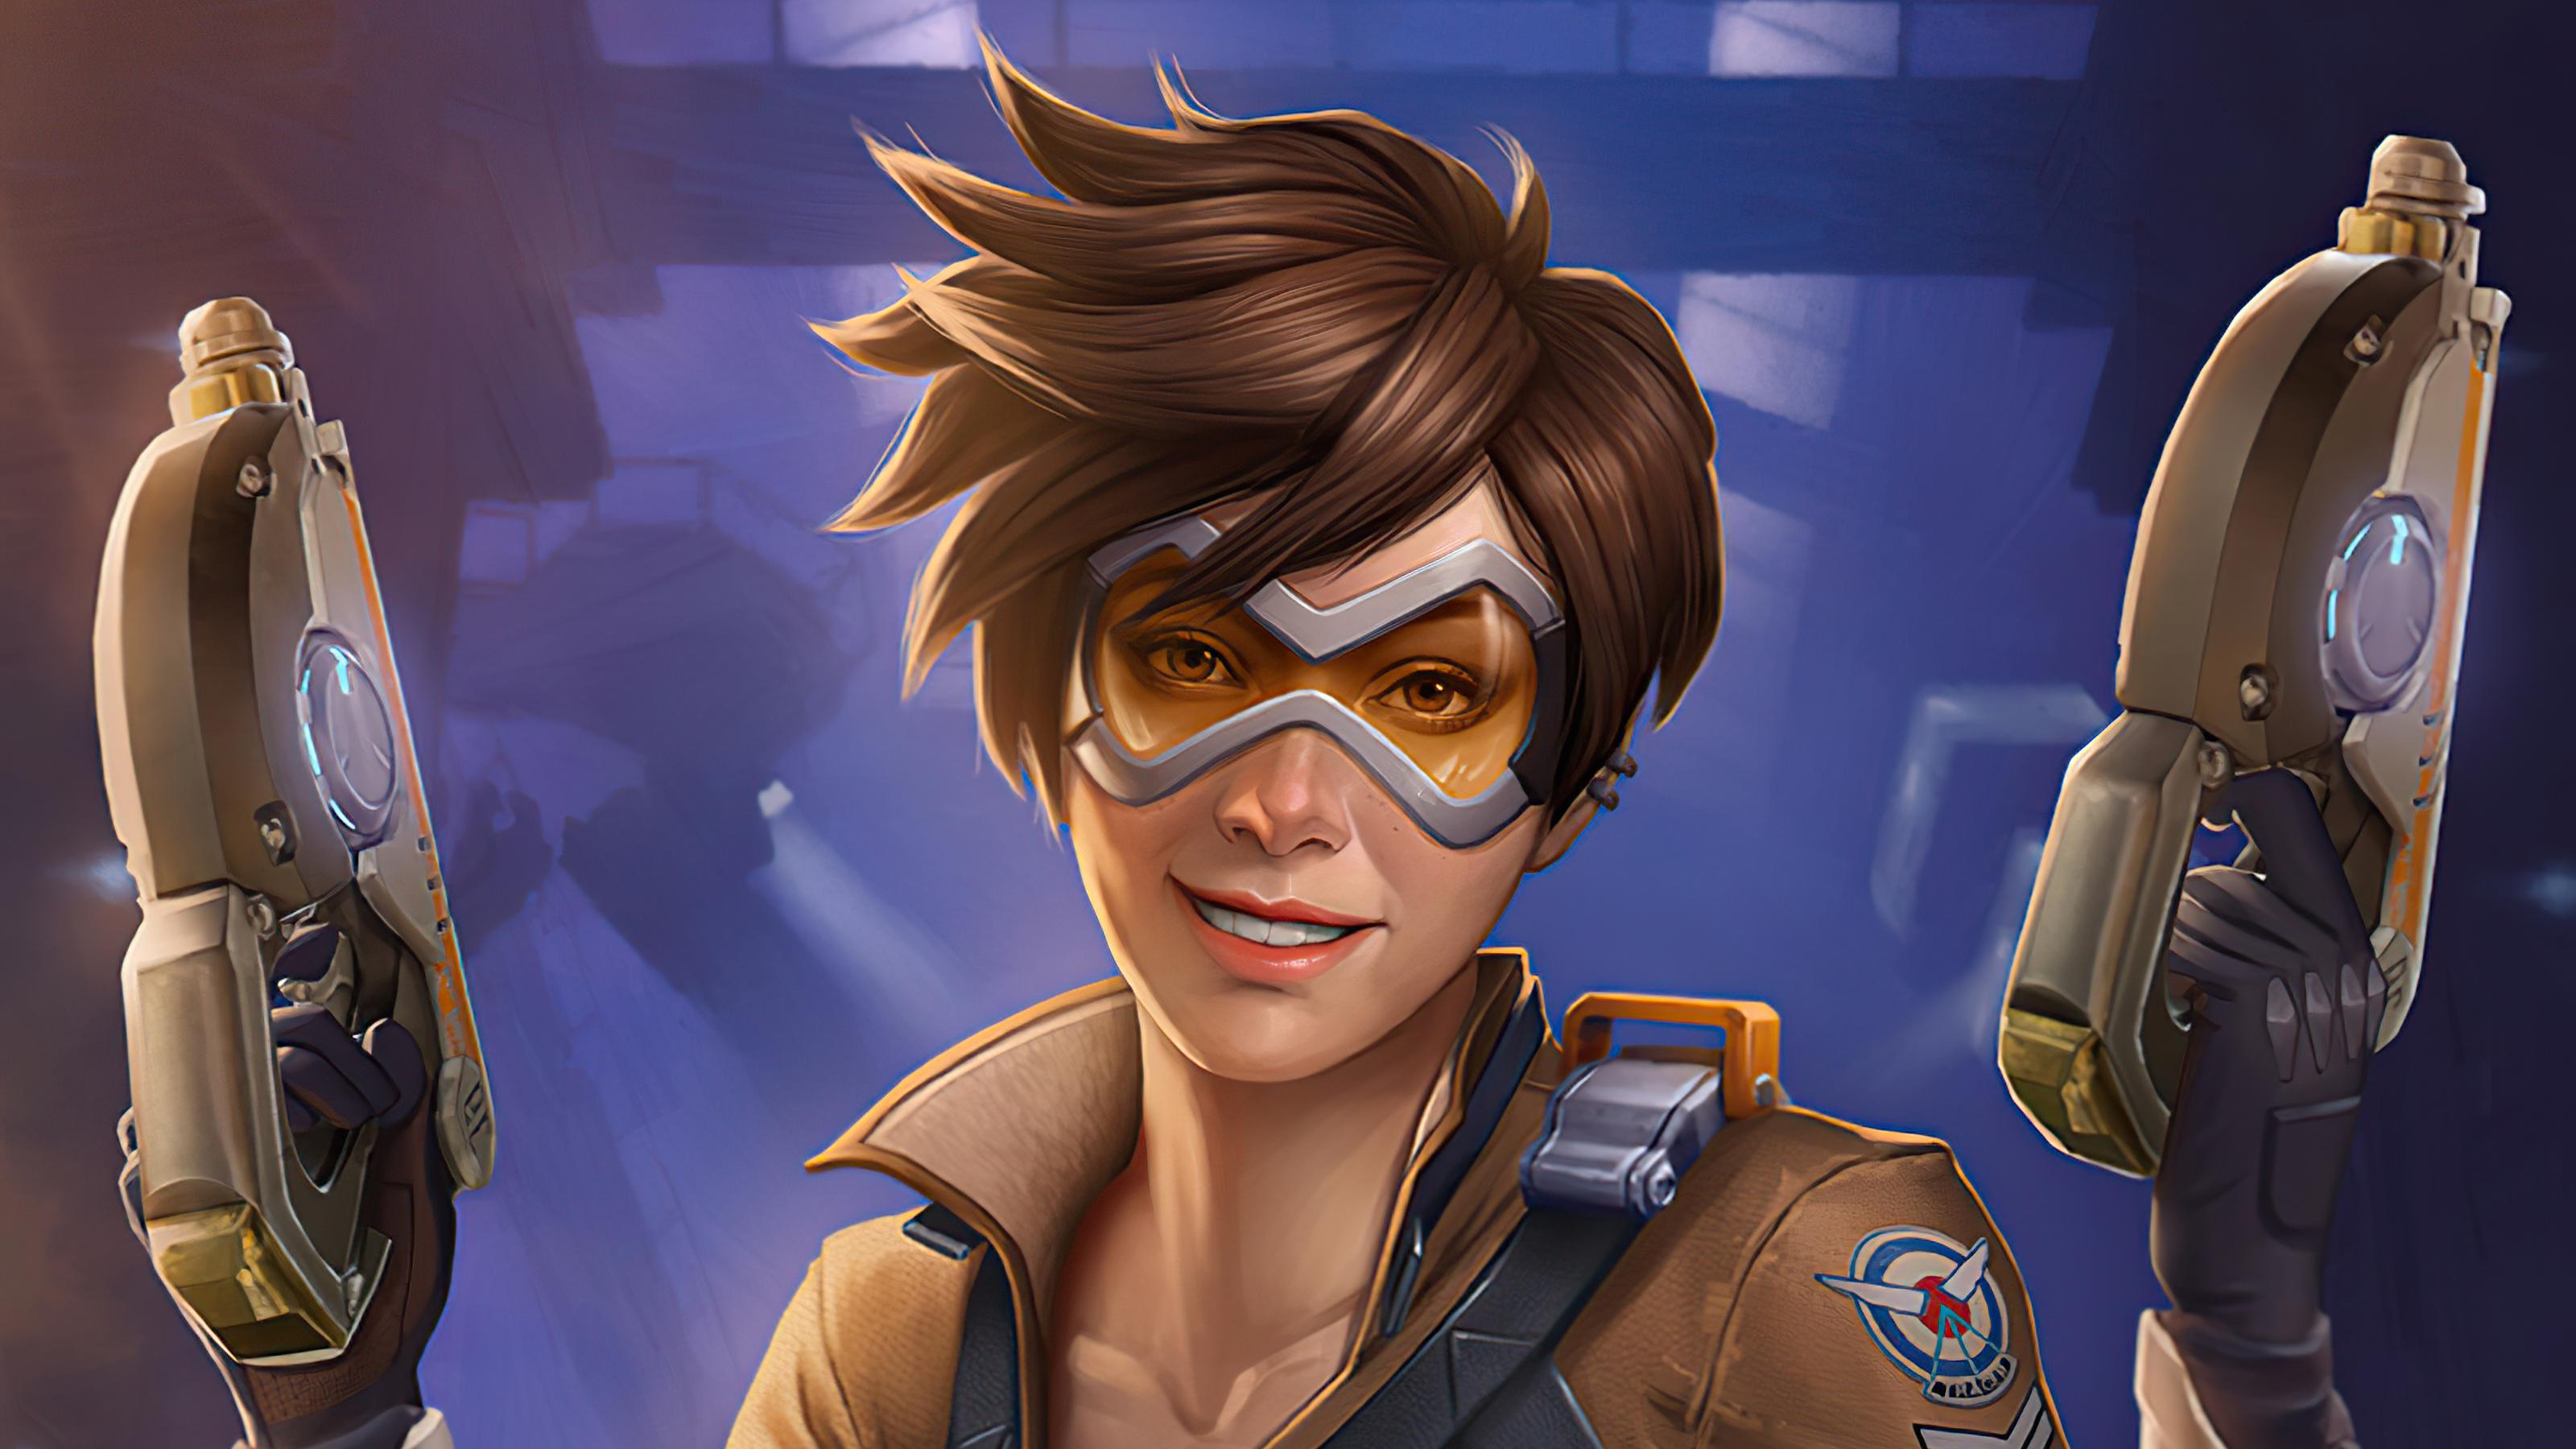 450+ Tracer (Overwatch) HD Wallpapers and Backgrounds